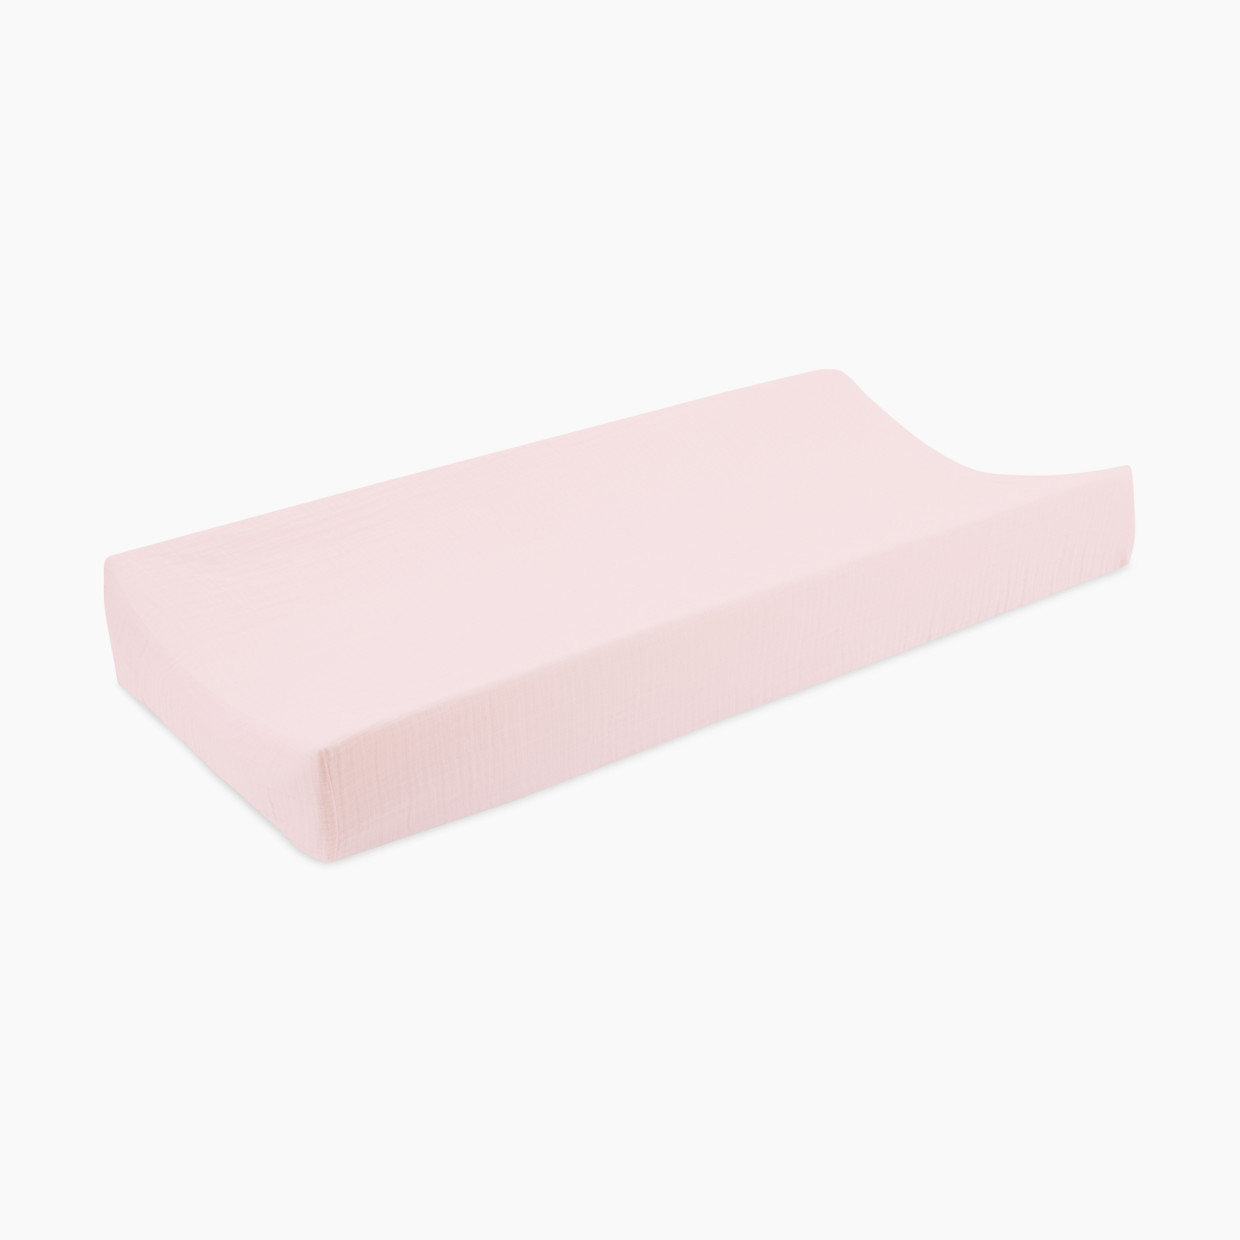 Aden + Anais Essentials Cotton Muslin Changing Pad Cover - Pink.